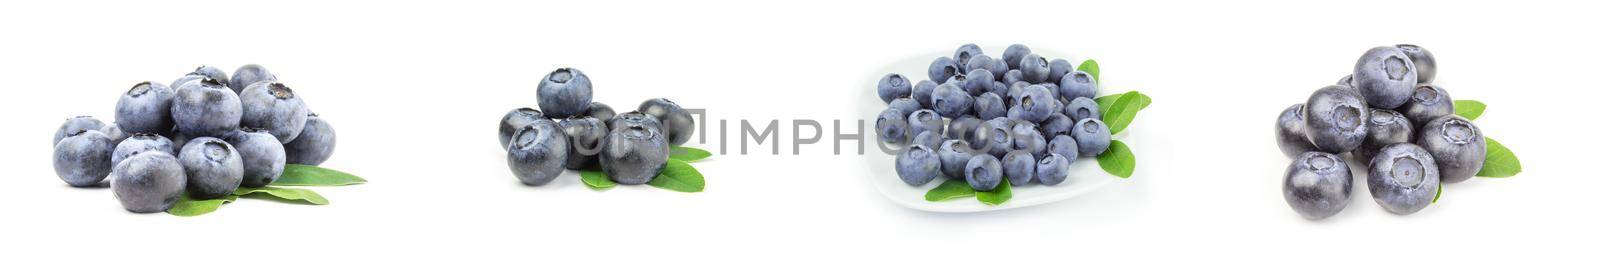 Collection of greatbilberry on a white background